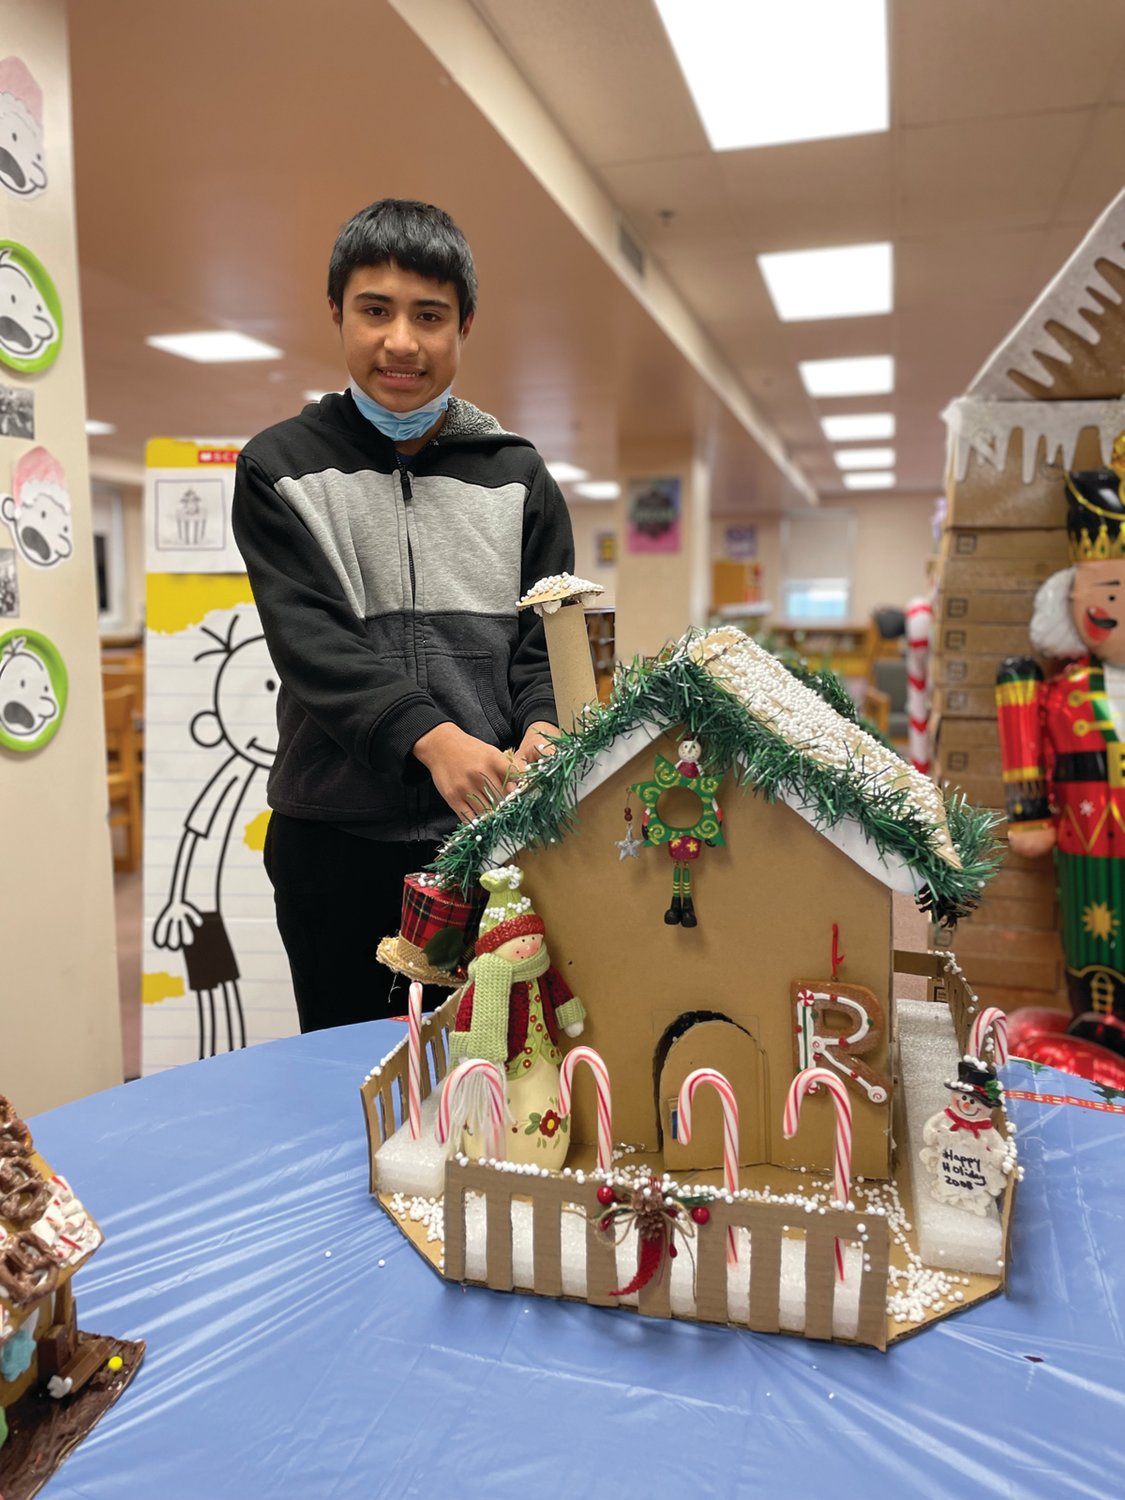 GINGERBREAD STORIES: Ferri students have been asked to build a storybook inspired gingerbread house, using homemade gingerbread, store-bought gingerbread, foam or cardboard for the base. Students can use any kind of materials to decorate the house. Eighth-grader Heber Munoz-Lopez designed a Jan Brett-inspired house.